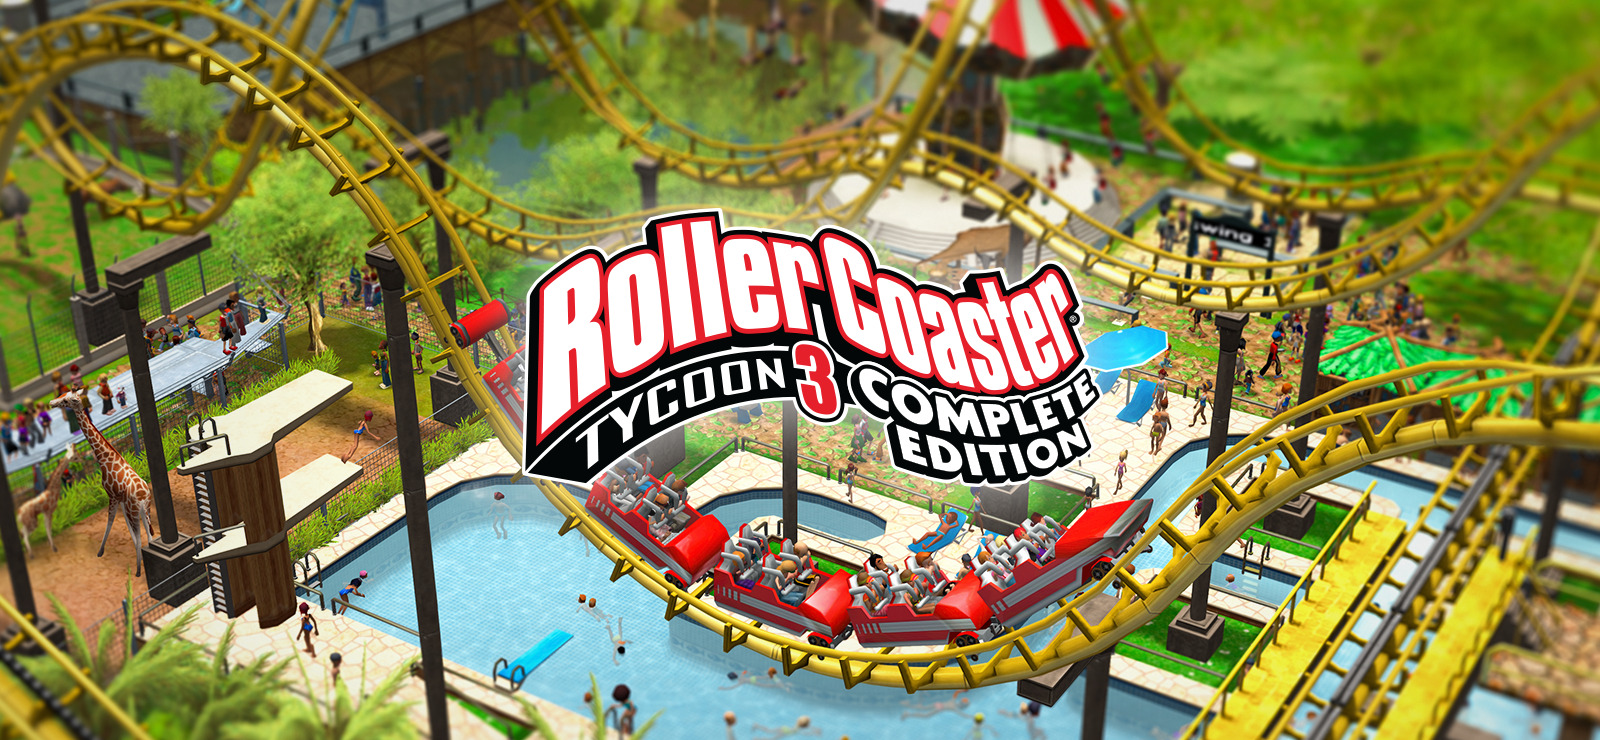 Jogo RollerCoaster Tycoon 3 Complete Edition - PC GOG